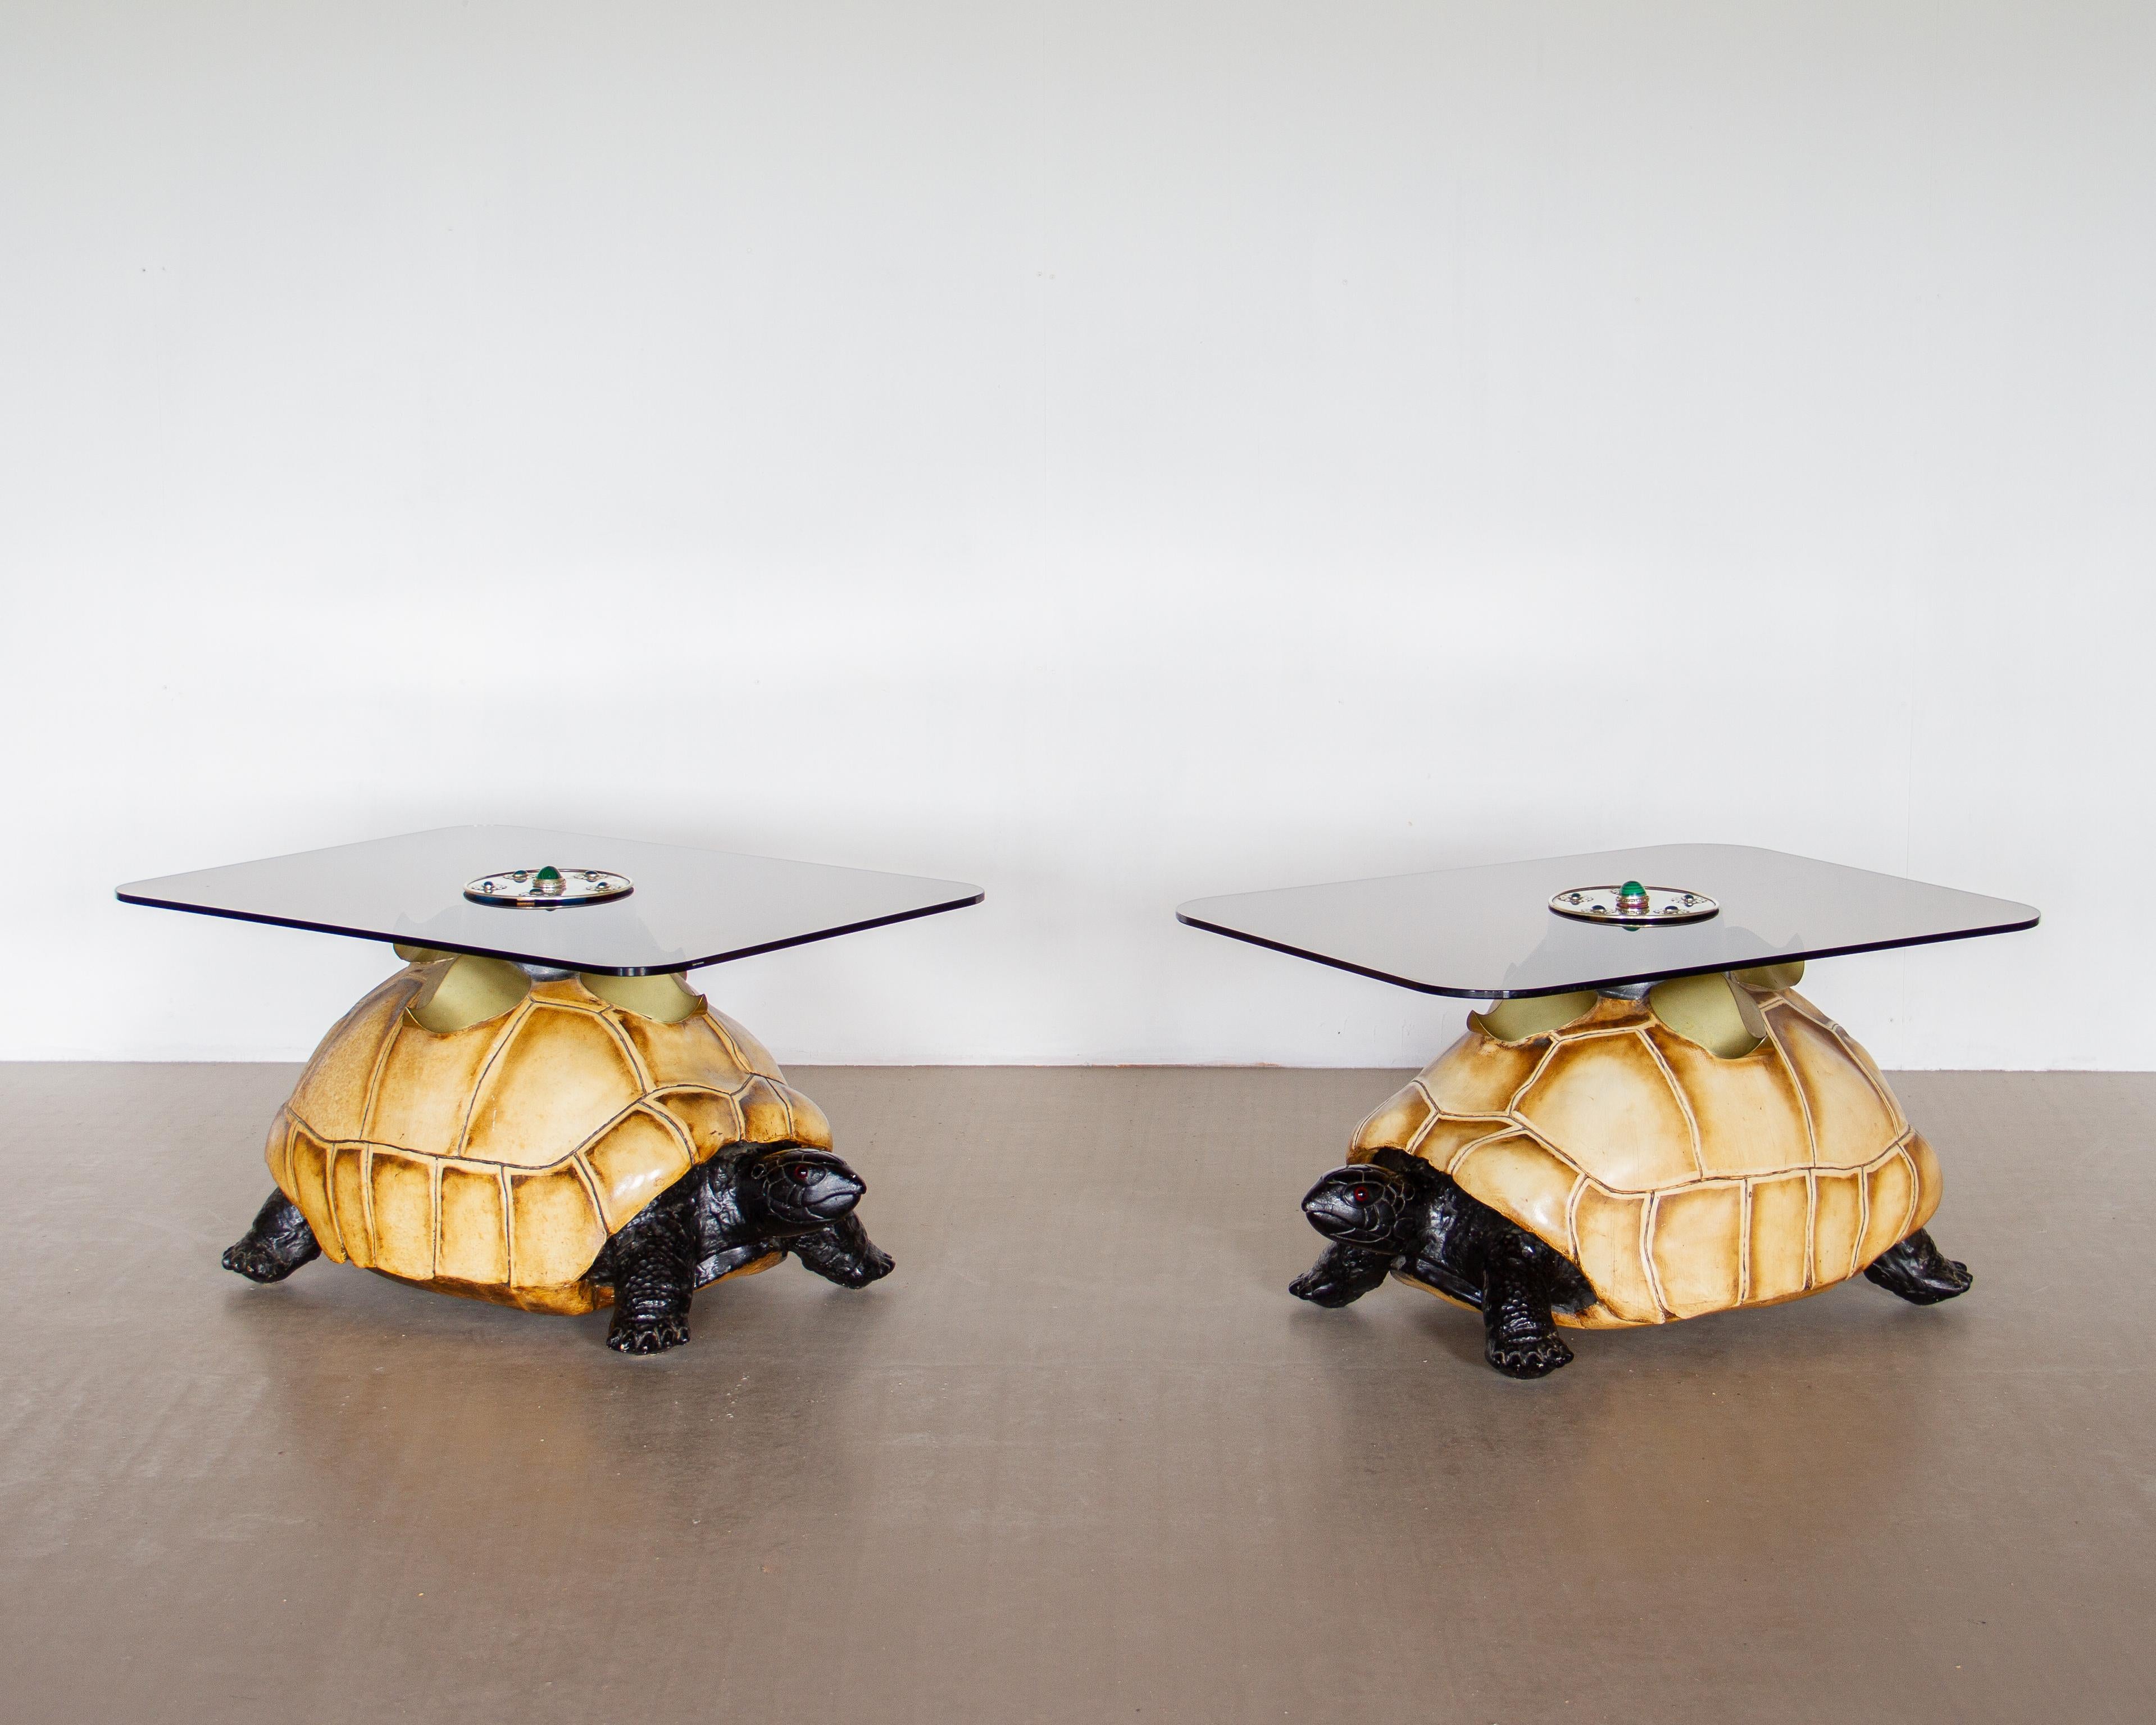 A Pair of tole painted Tortoise coffee tables by Anthony Redmile, in excellent original condition, each stamped Redmile, London with smoked glass tops surmounted by brass, malachite and green glass cabochons.